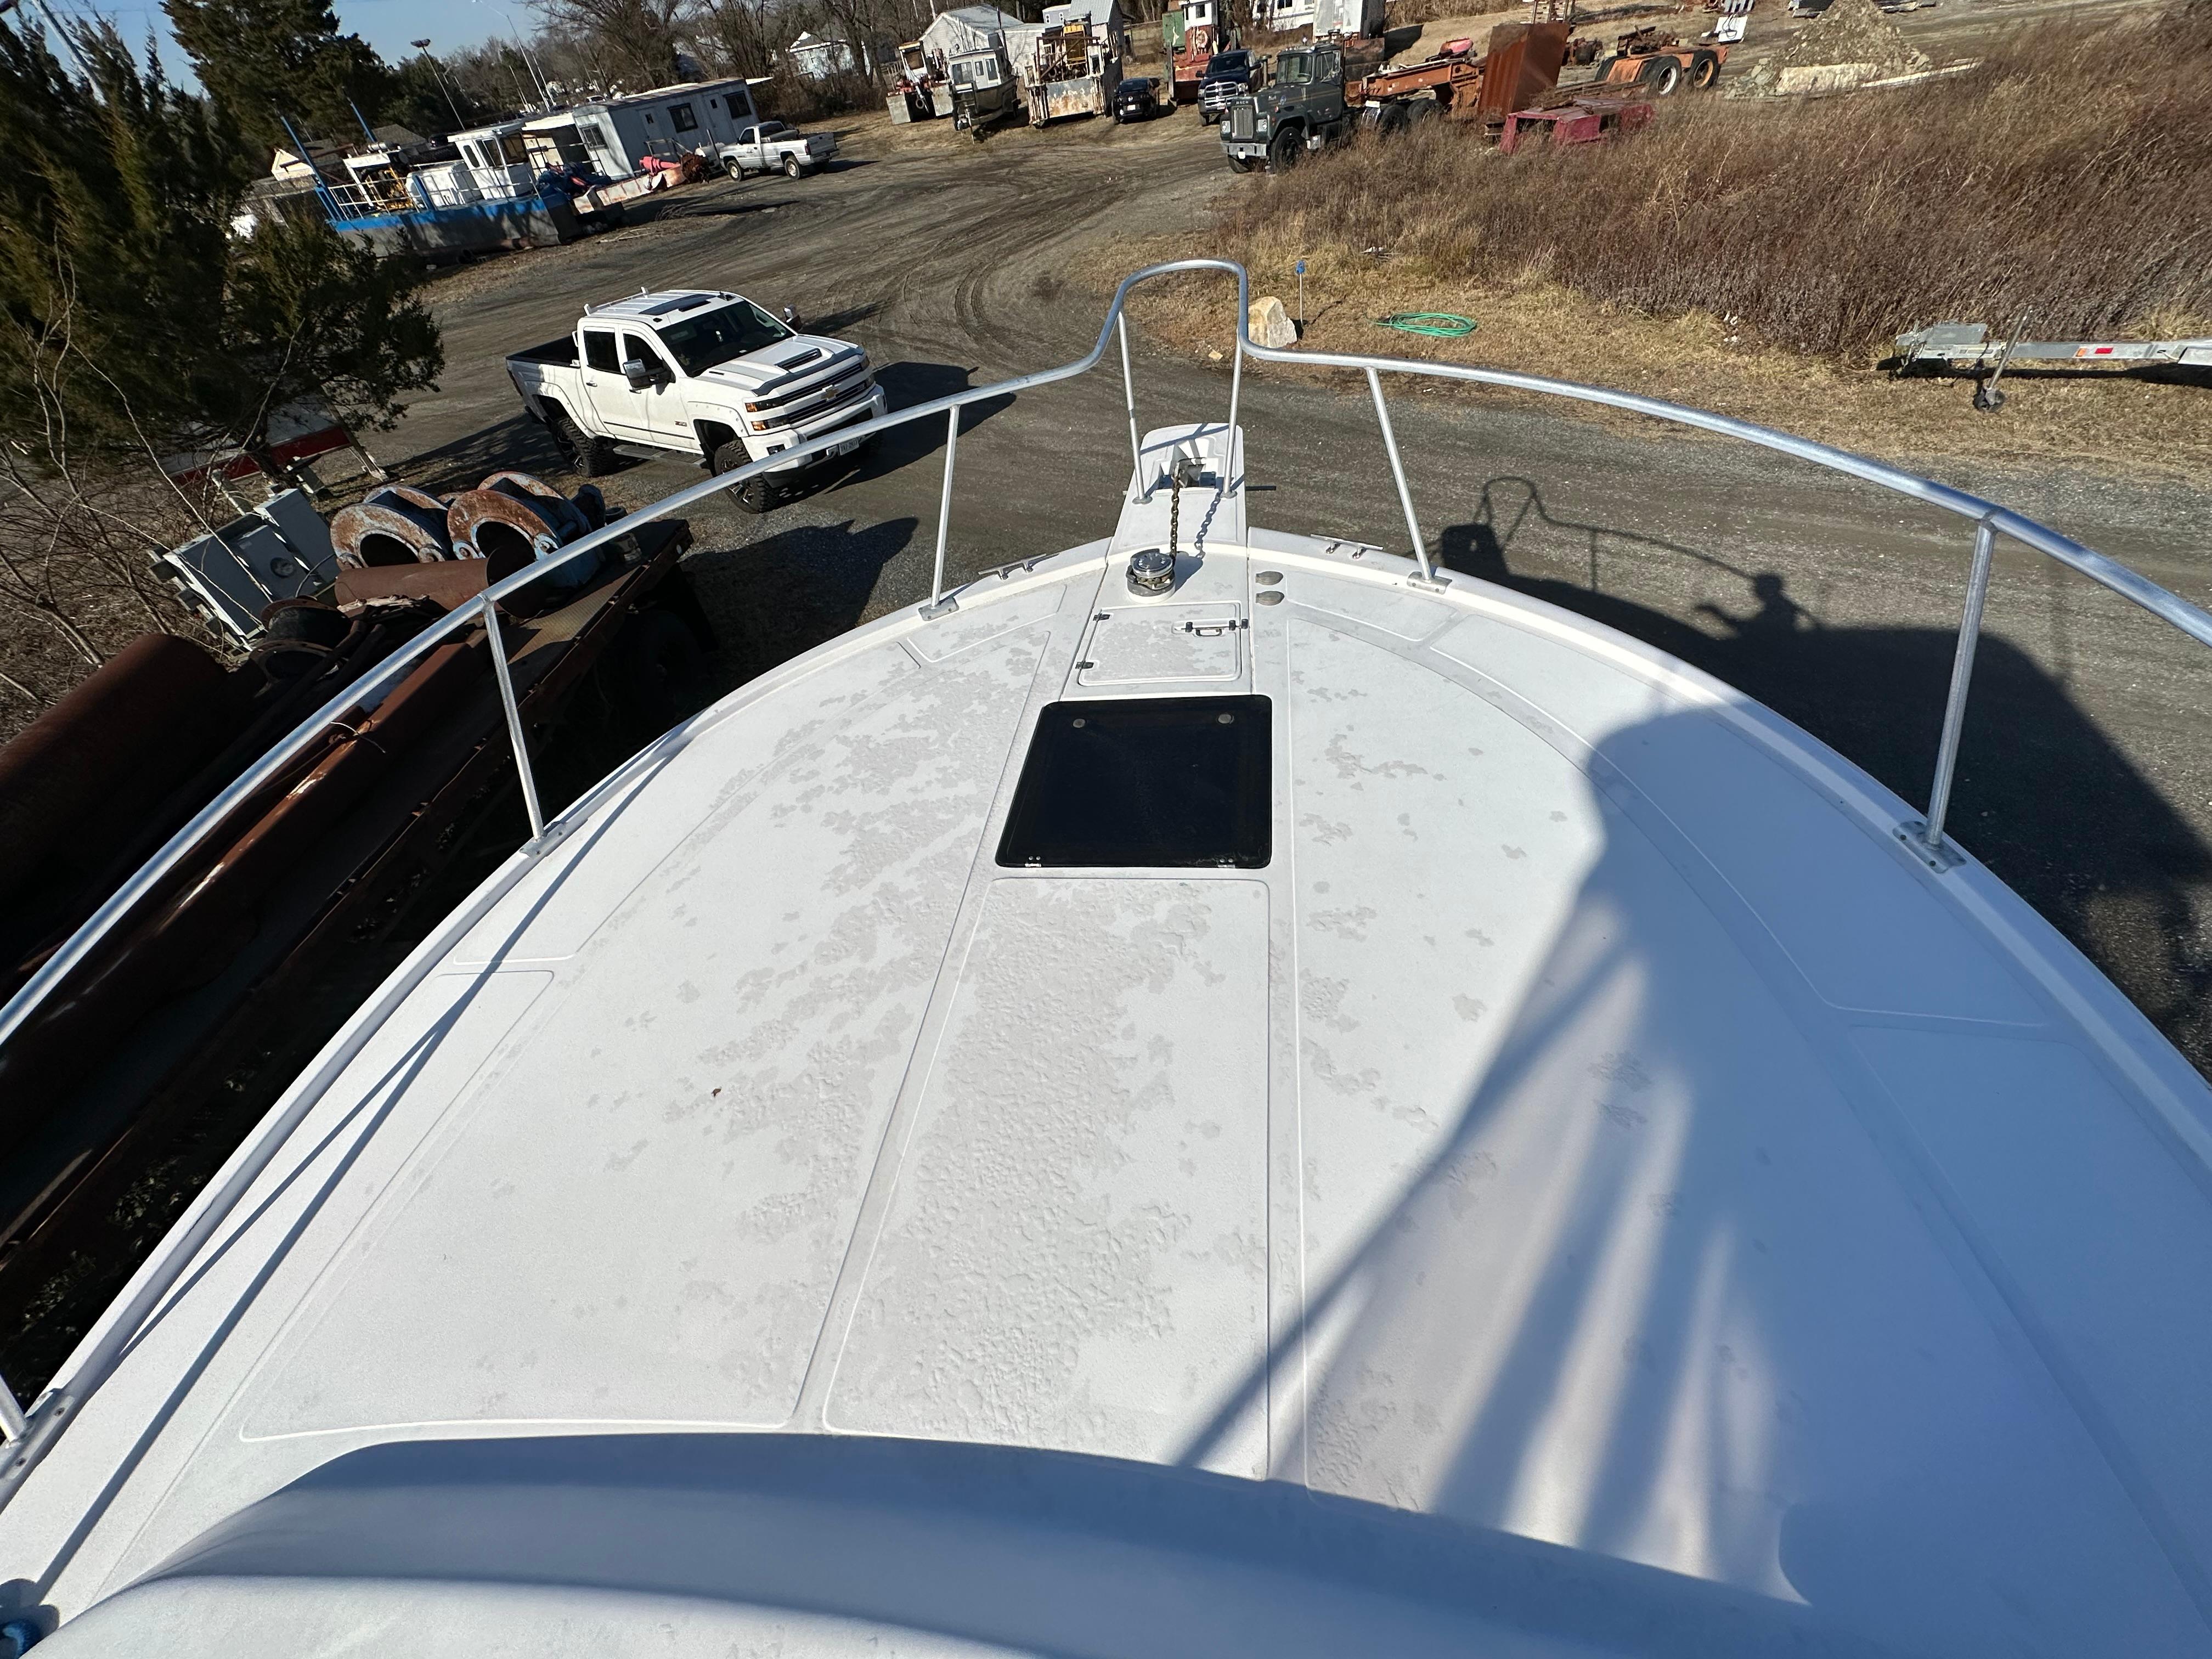 MARBEC Yacht Brokers Of Annapolis